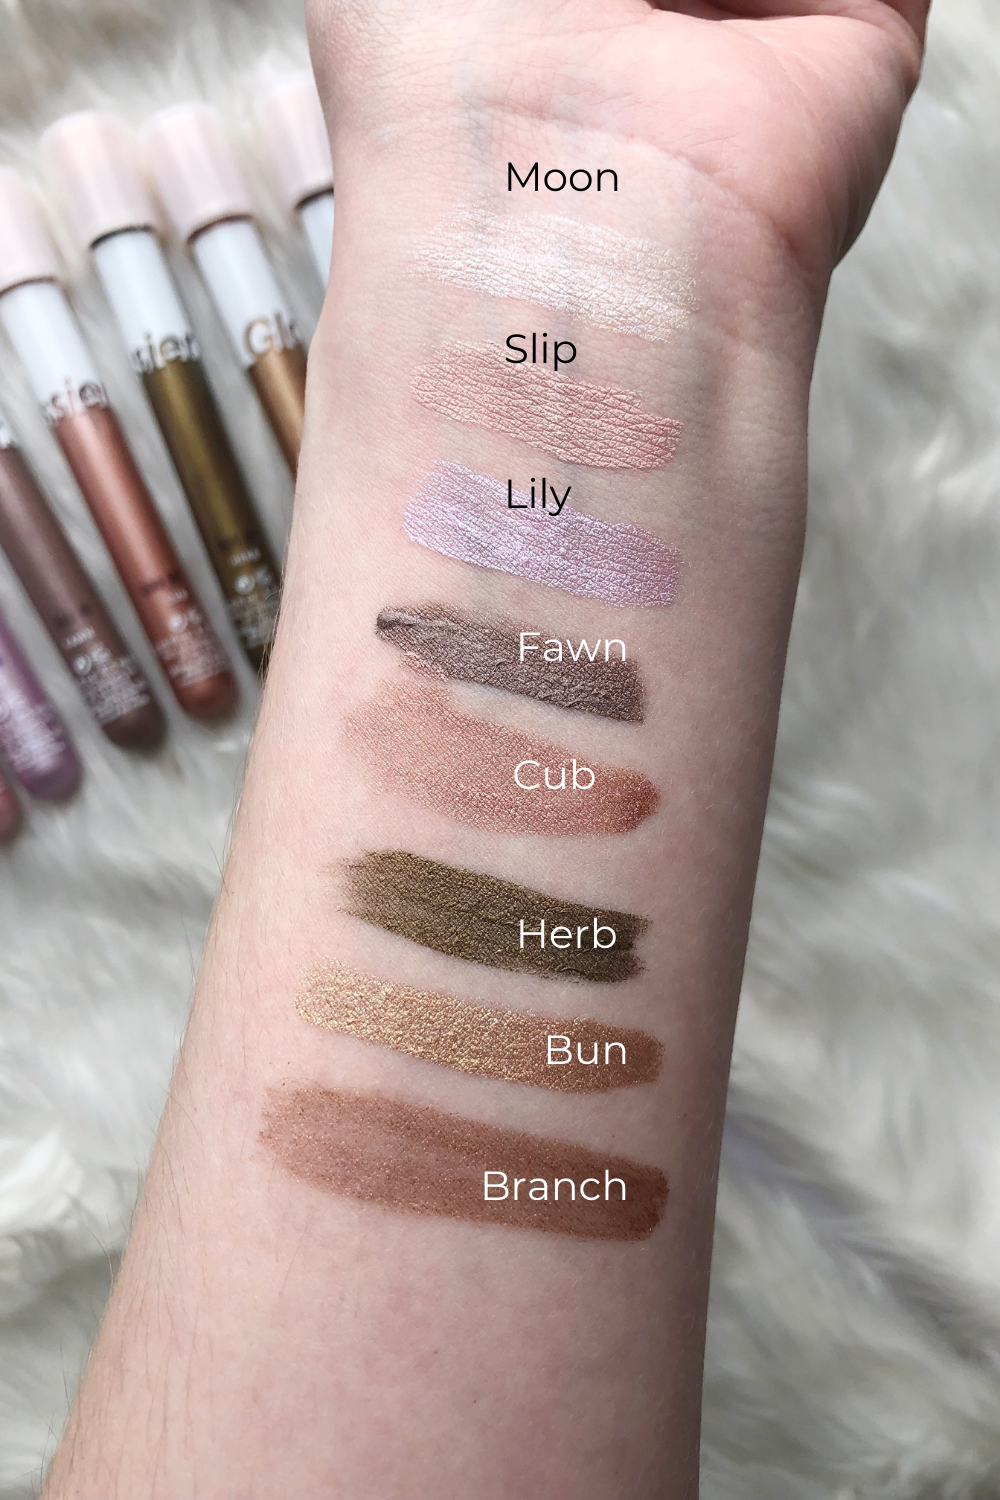 Lidstar shades swatches